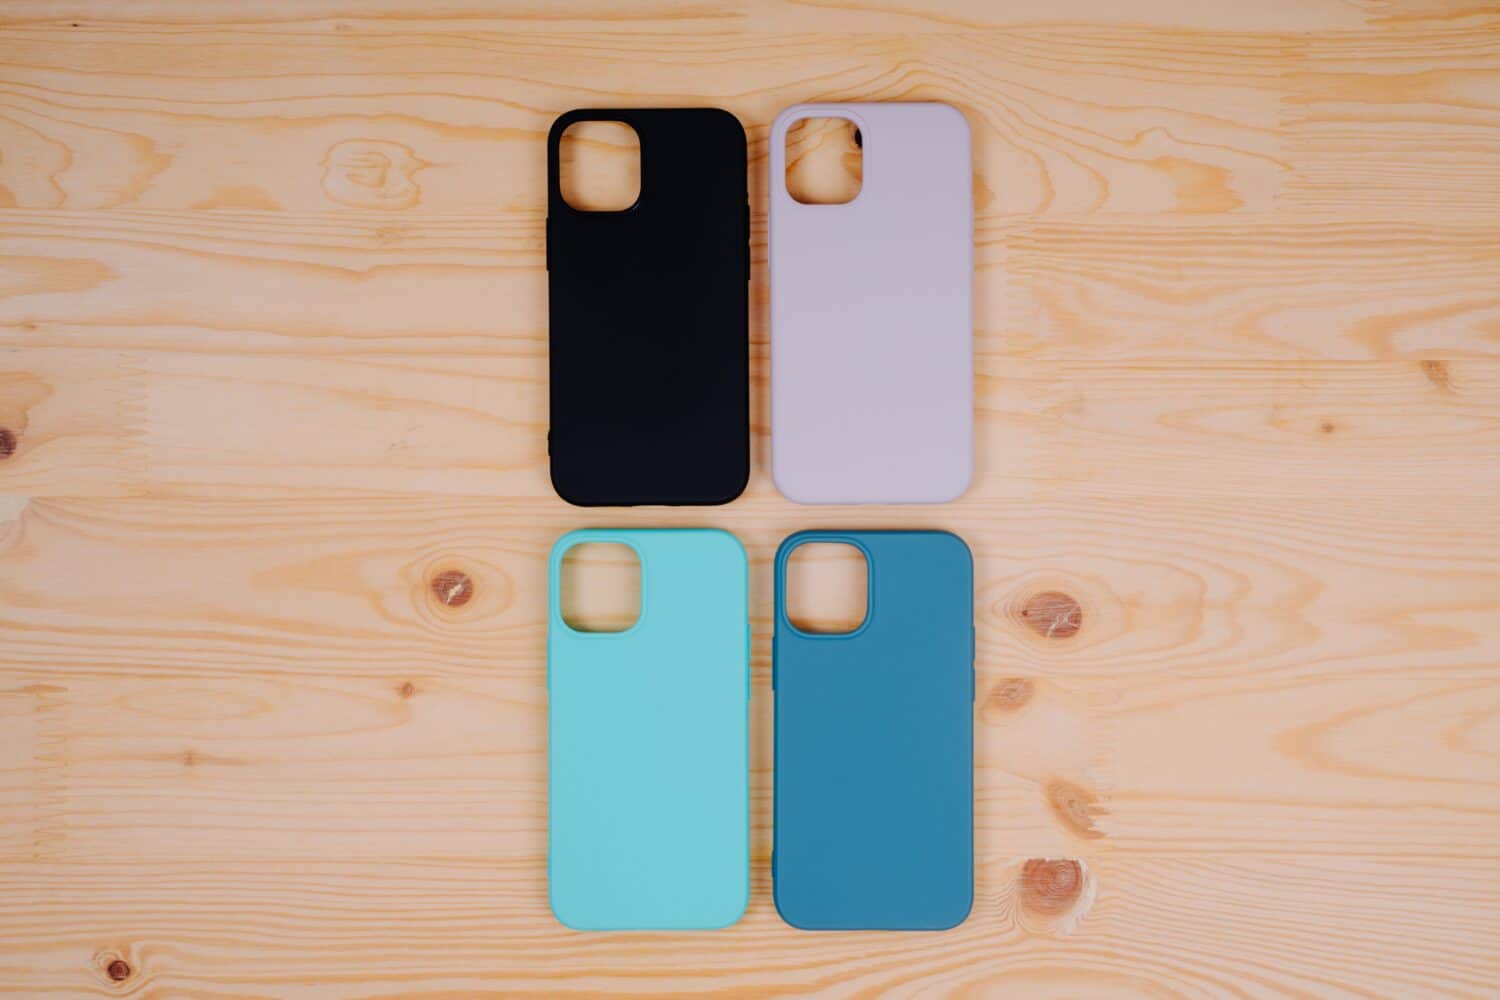 Four silicone smartphone cases. Protective smartphone cases in black, beige, mint and turquoise colors.